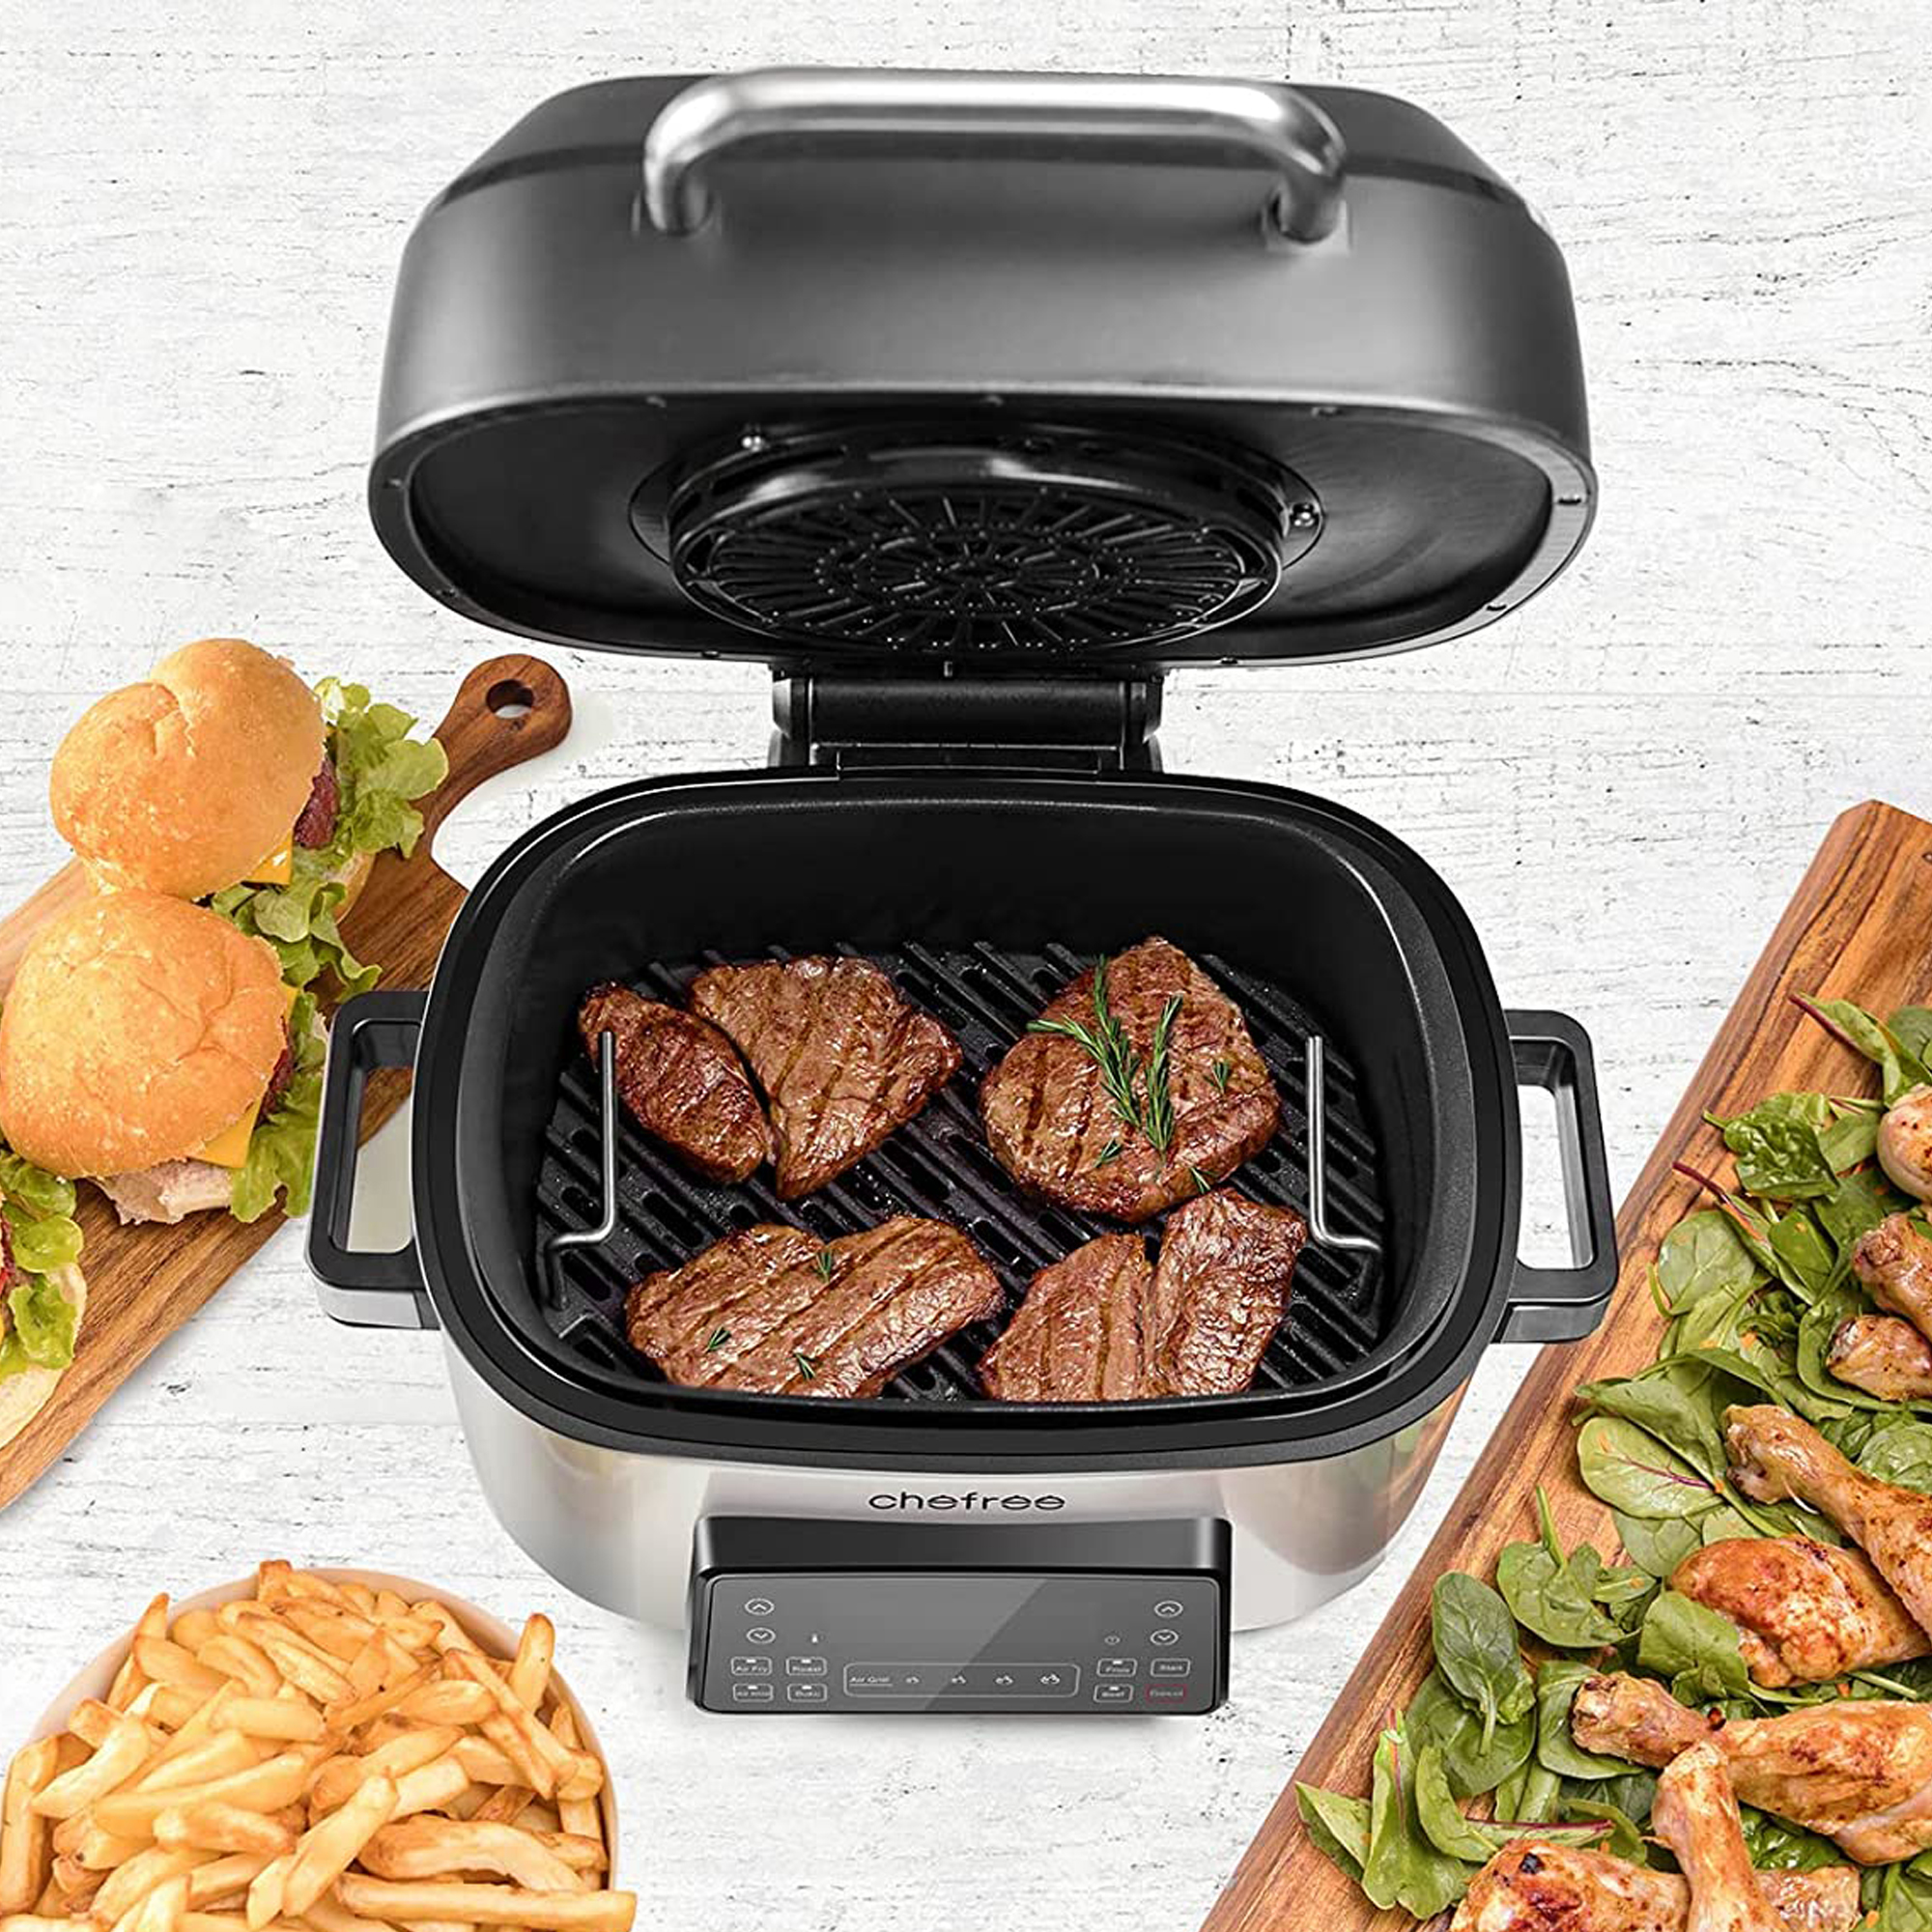 AIRFRYER À AIR CHAUD MULTIFONCTION 🤩 CHEFREE AFG01 Grill Air Fryer 